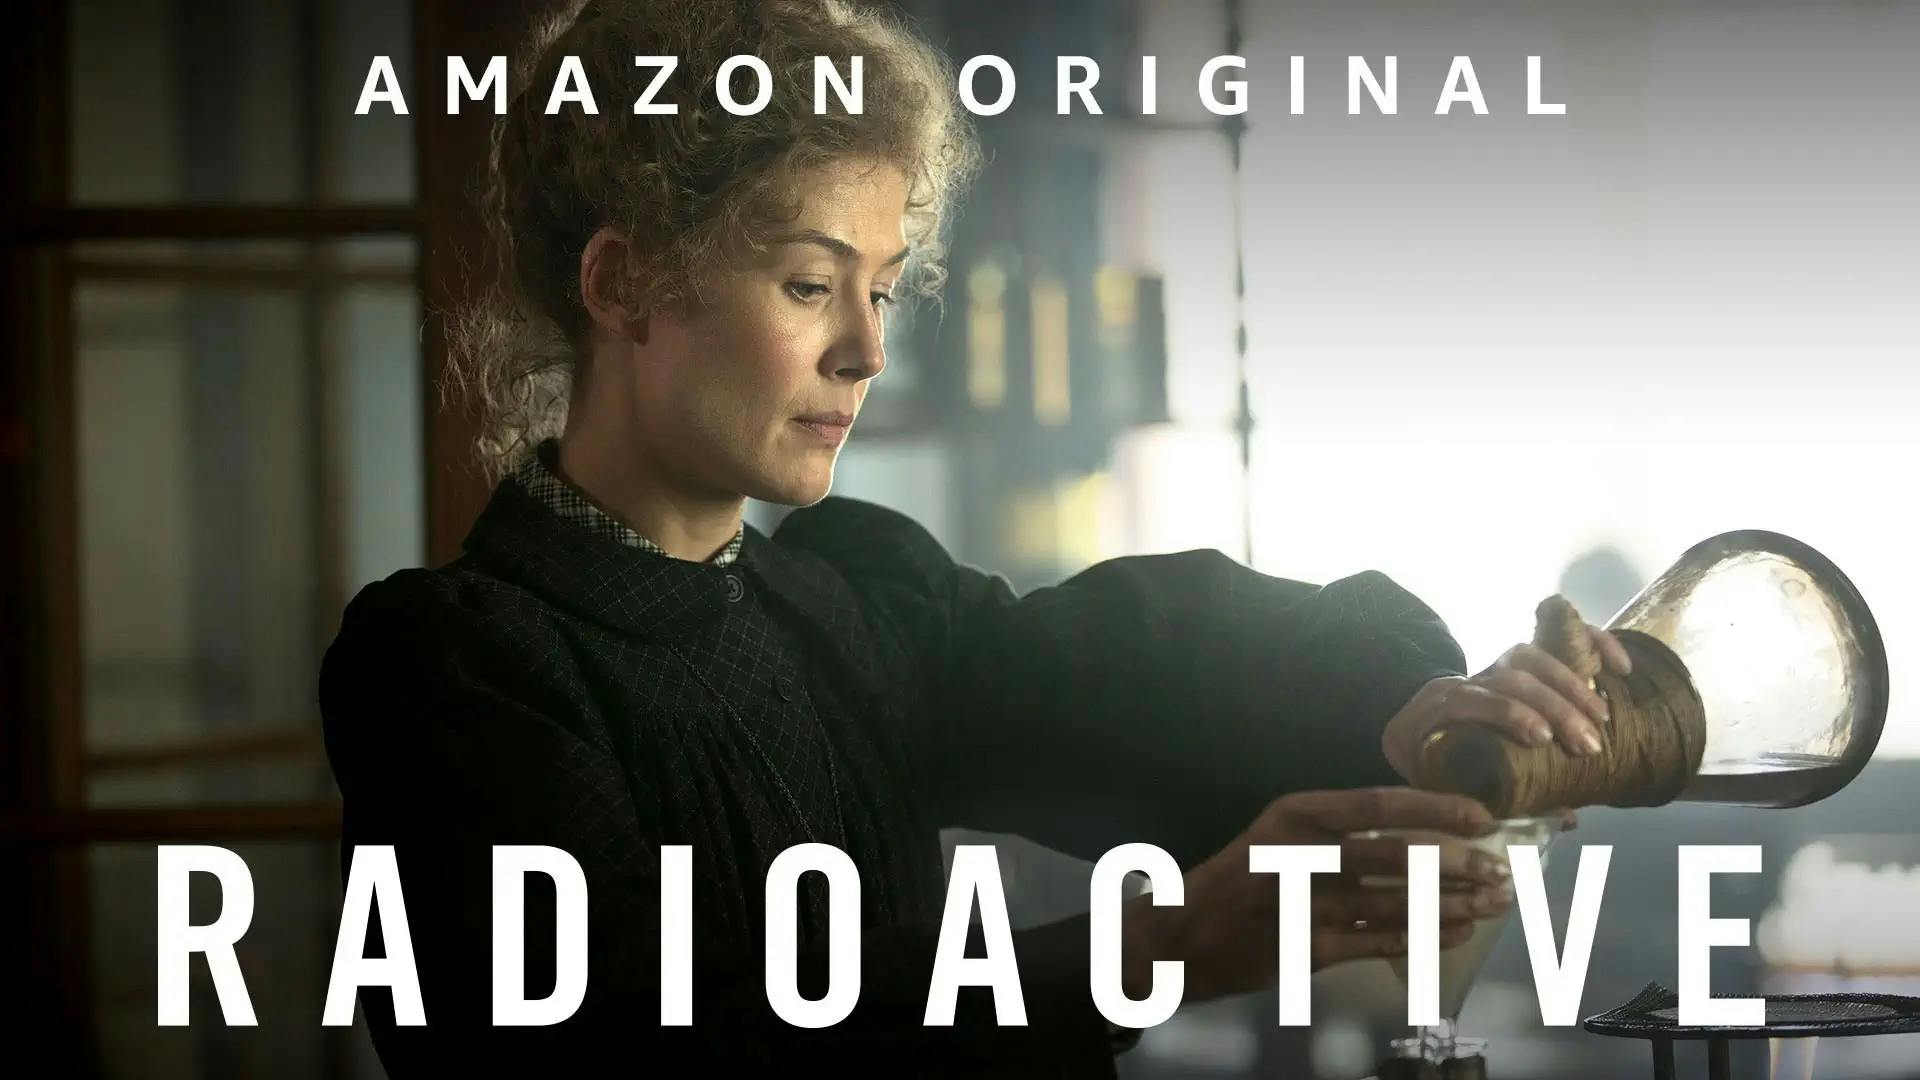 The thumbnail cover for the movie Radioactive